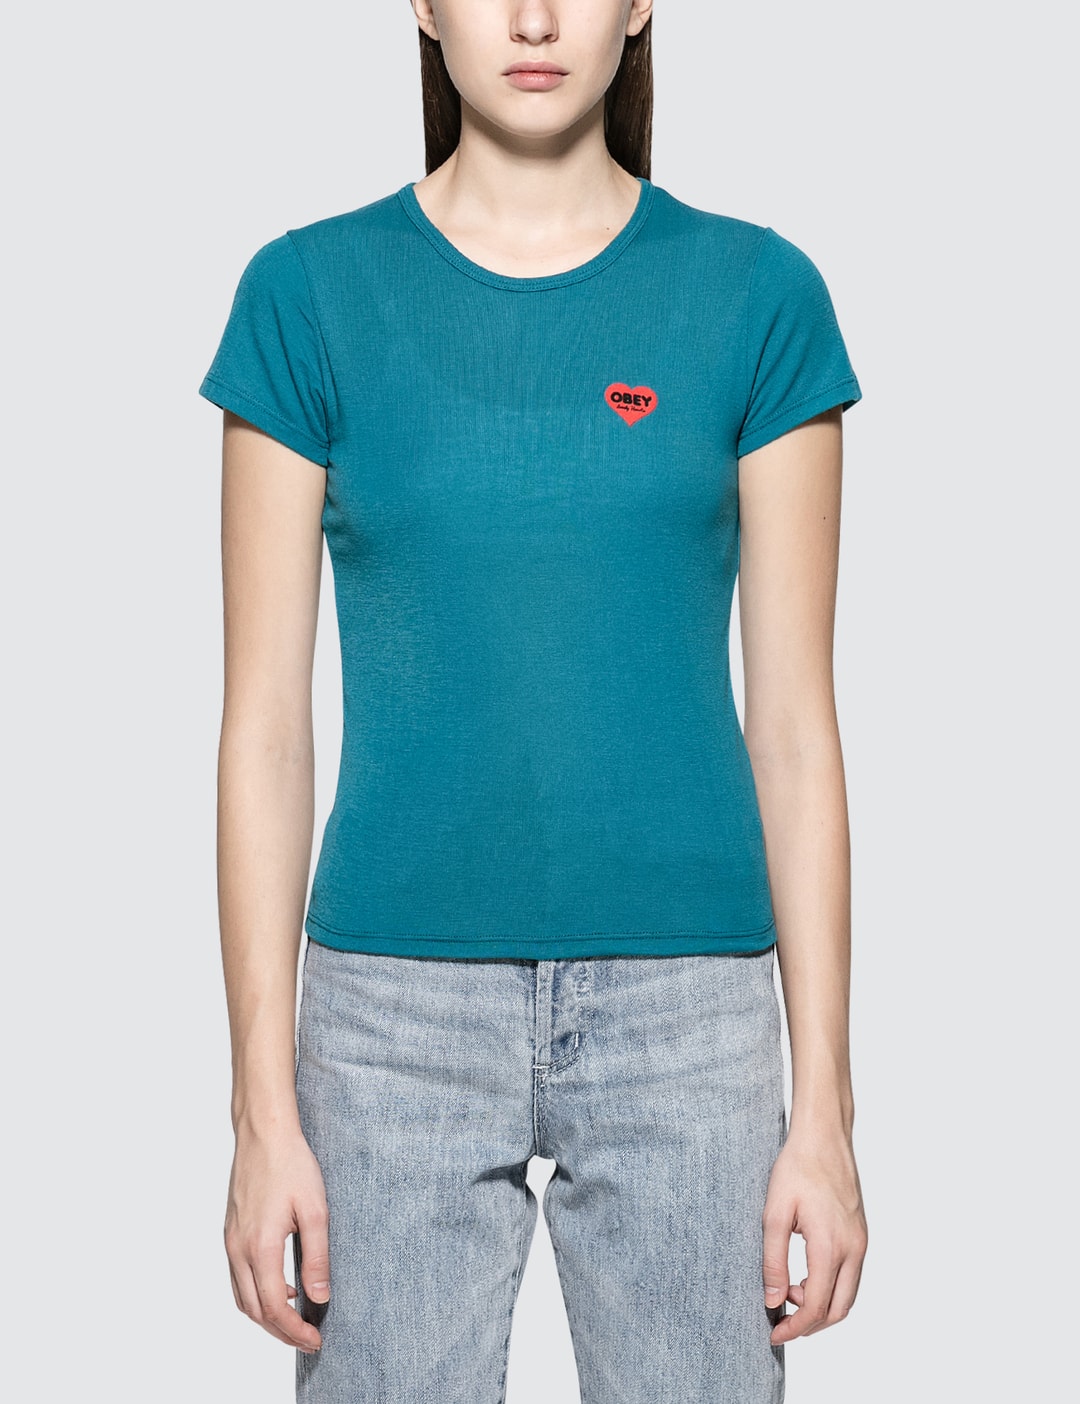 Obey - Lonely Hearts Babydoll S/S T-Shirt | HBX - Globally Curated ...